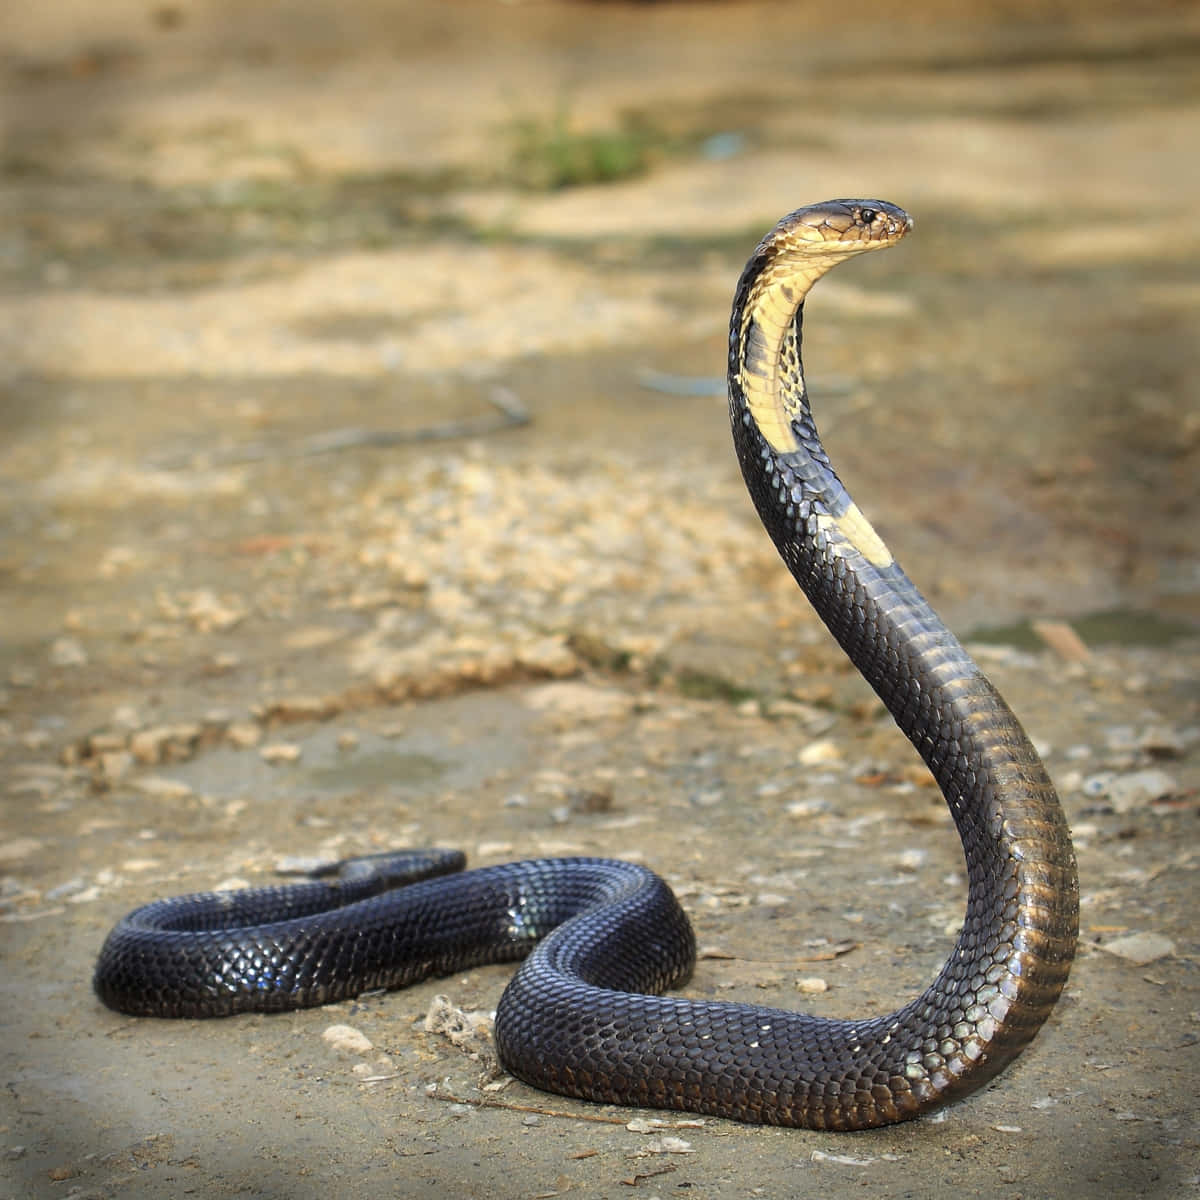 King Cobra strikes fear in the hearts of many.